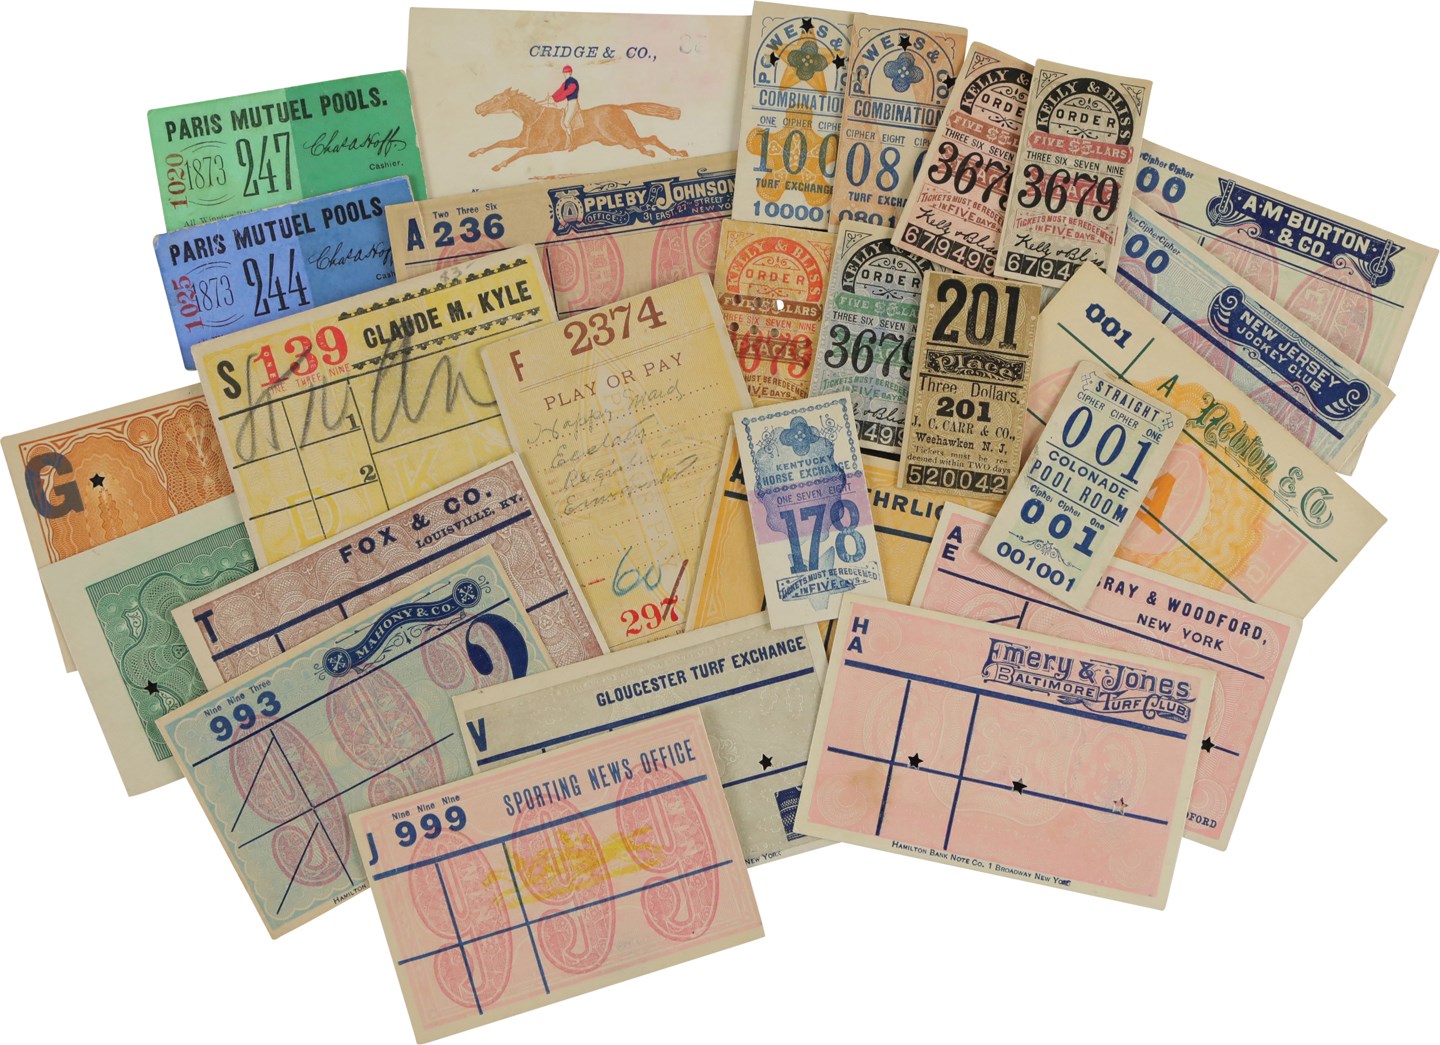 - Original Paris Mutuel Pool & Poolroom Wagering Tickets from Over a Century Ago (27)